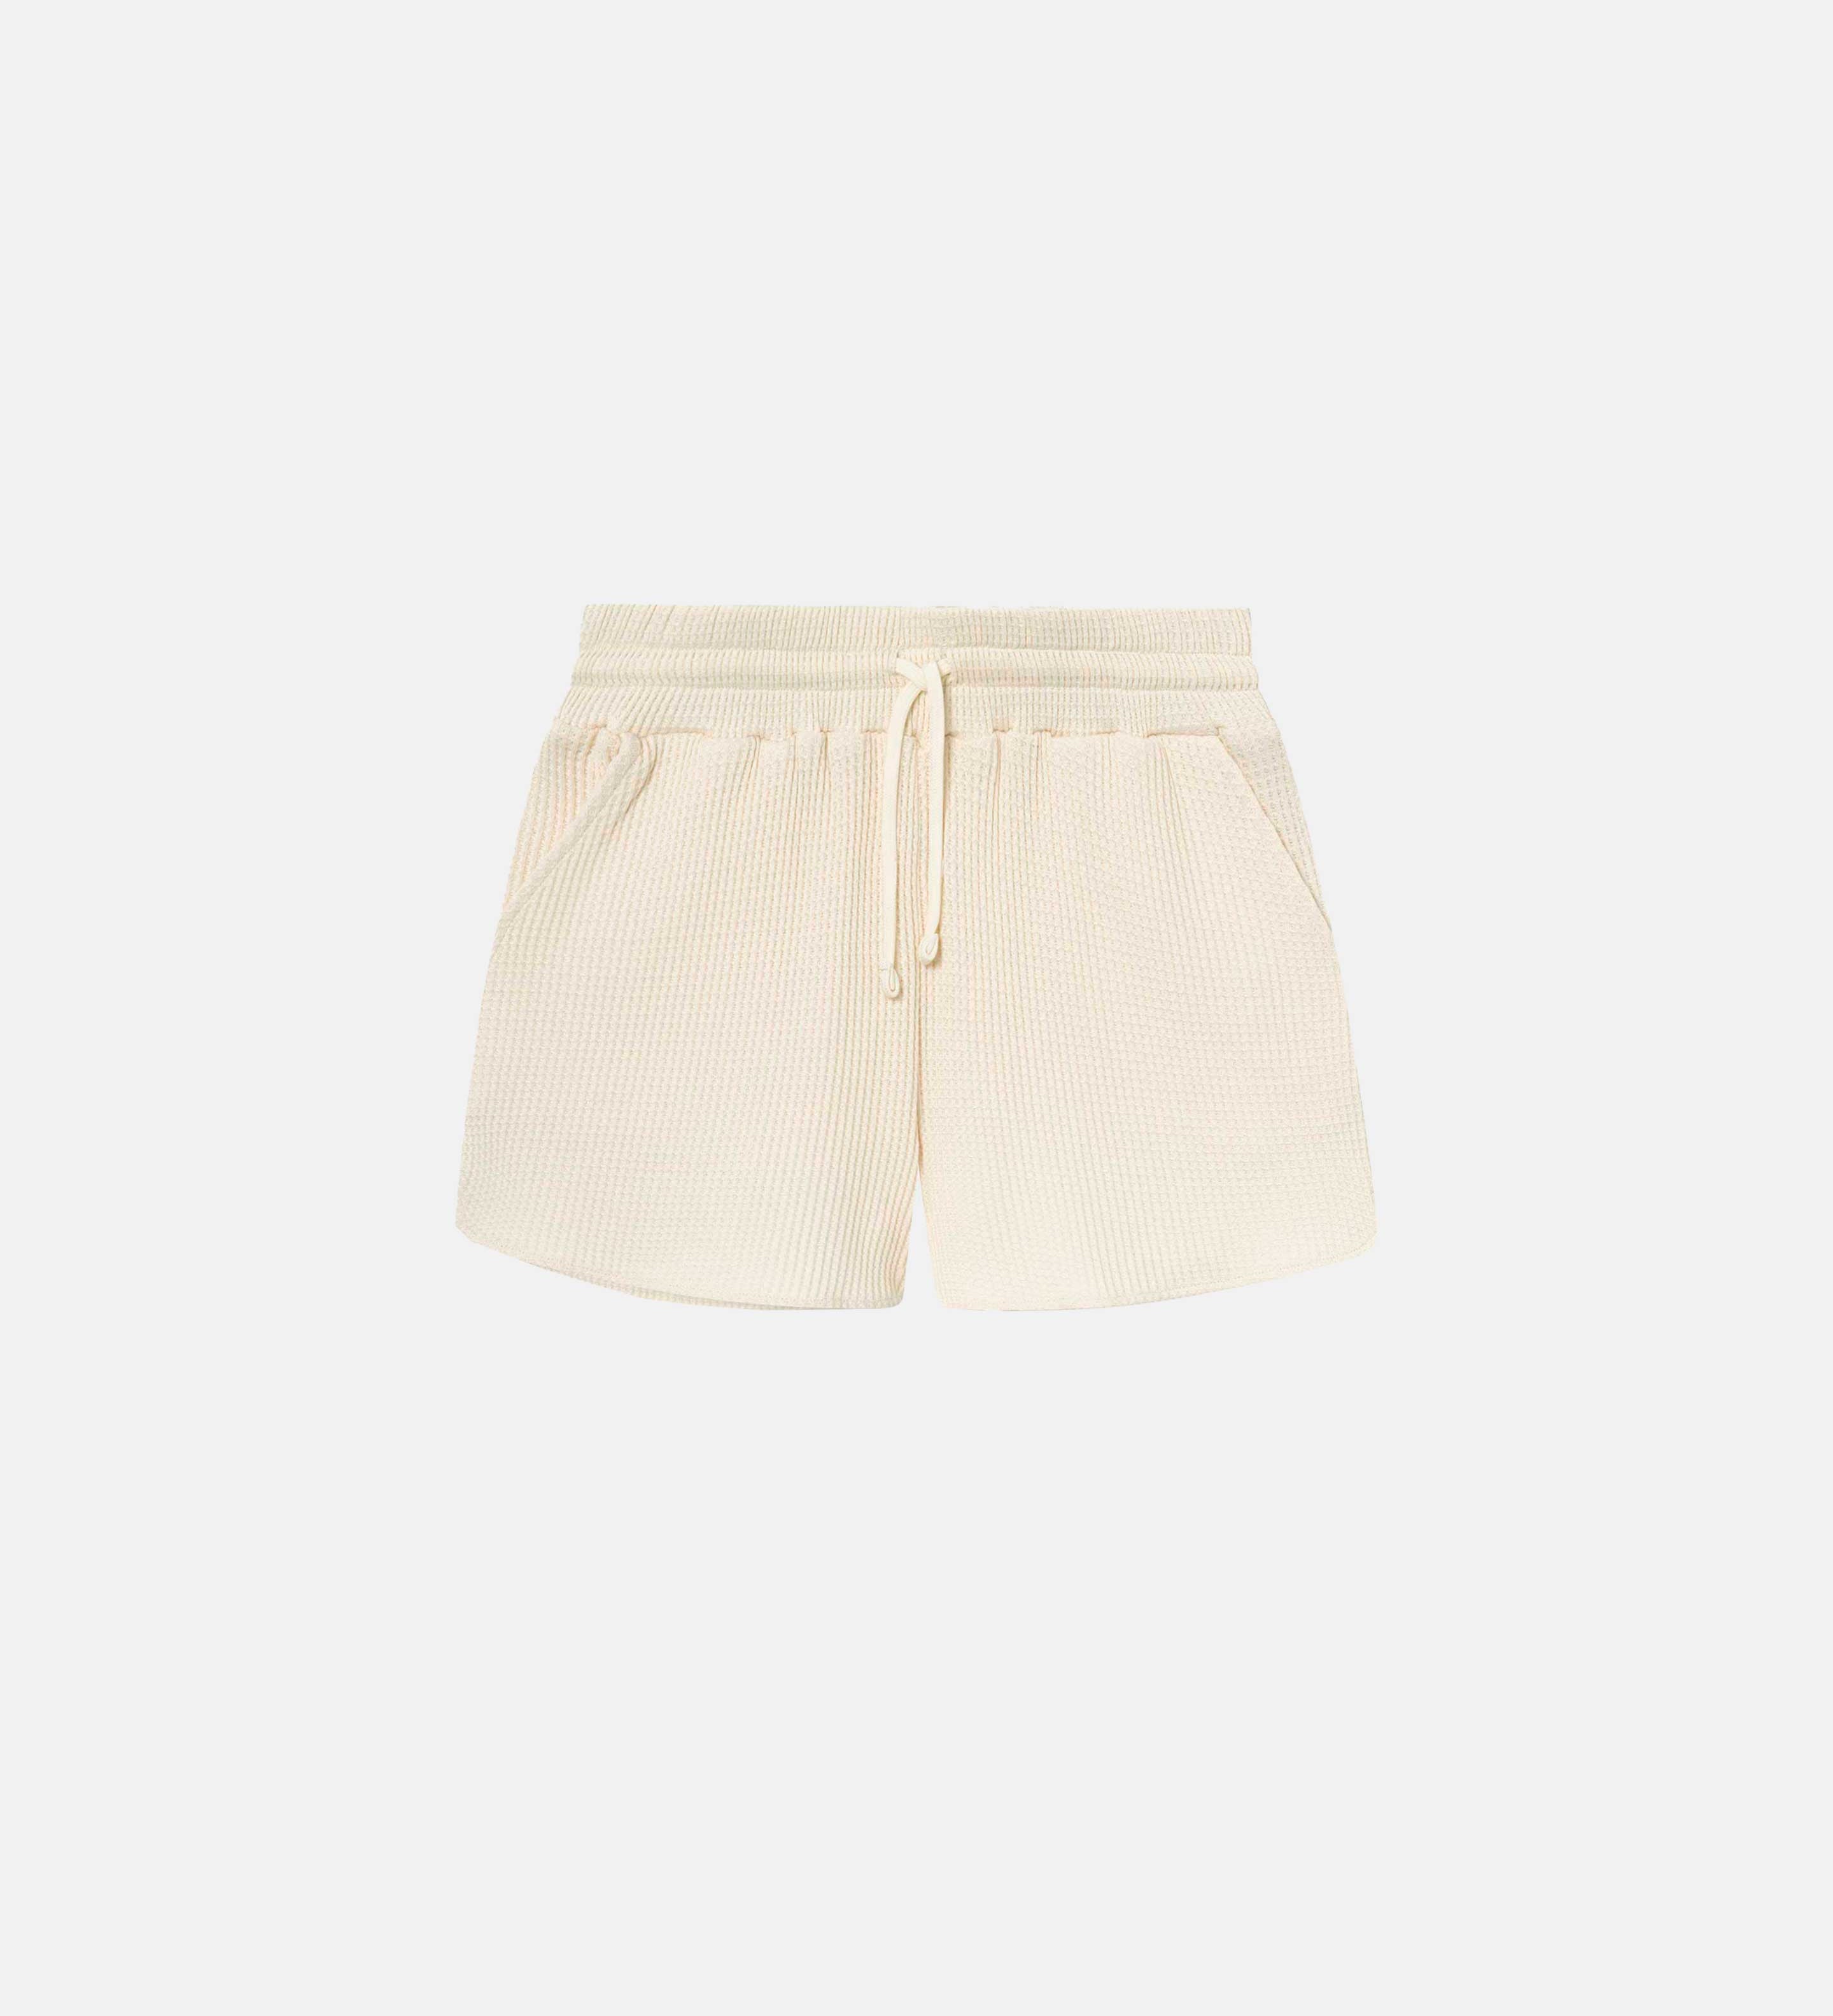 Off white waffle-patterned short-length shorts with two front pockets and a drawstring.